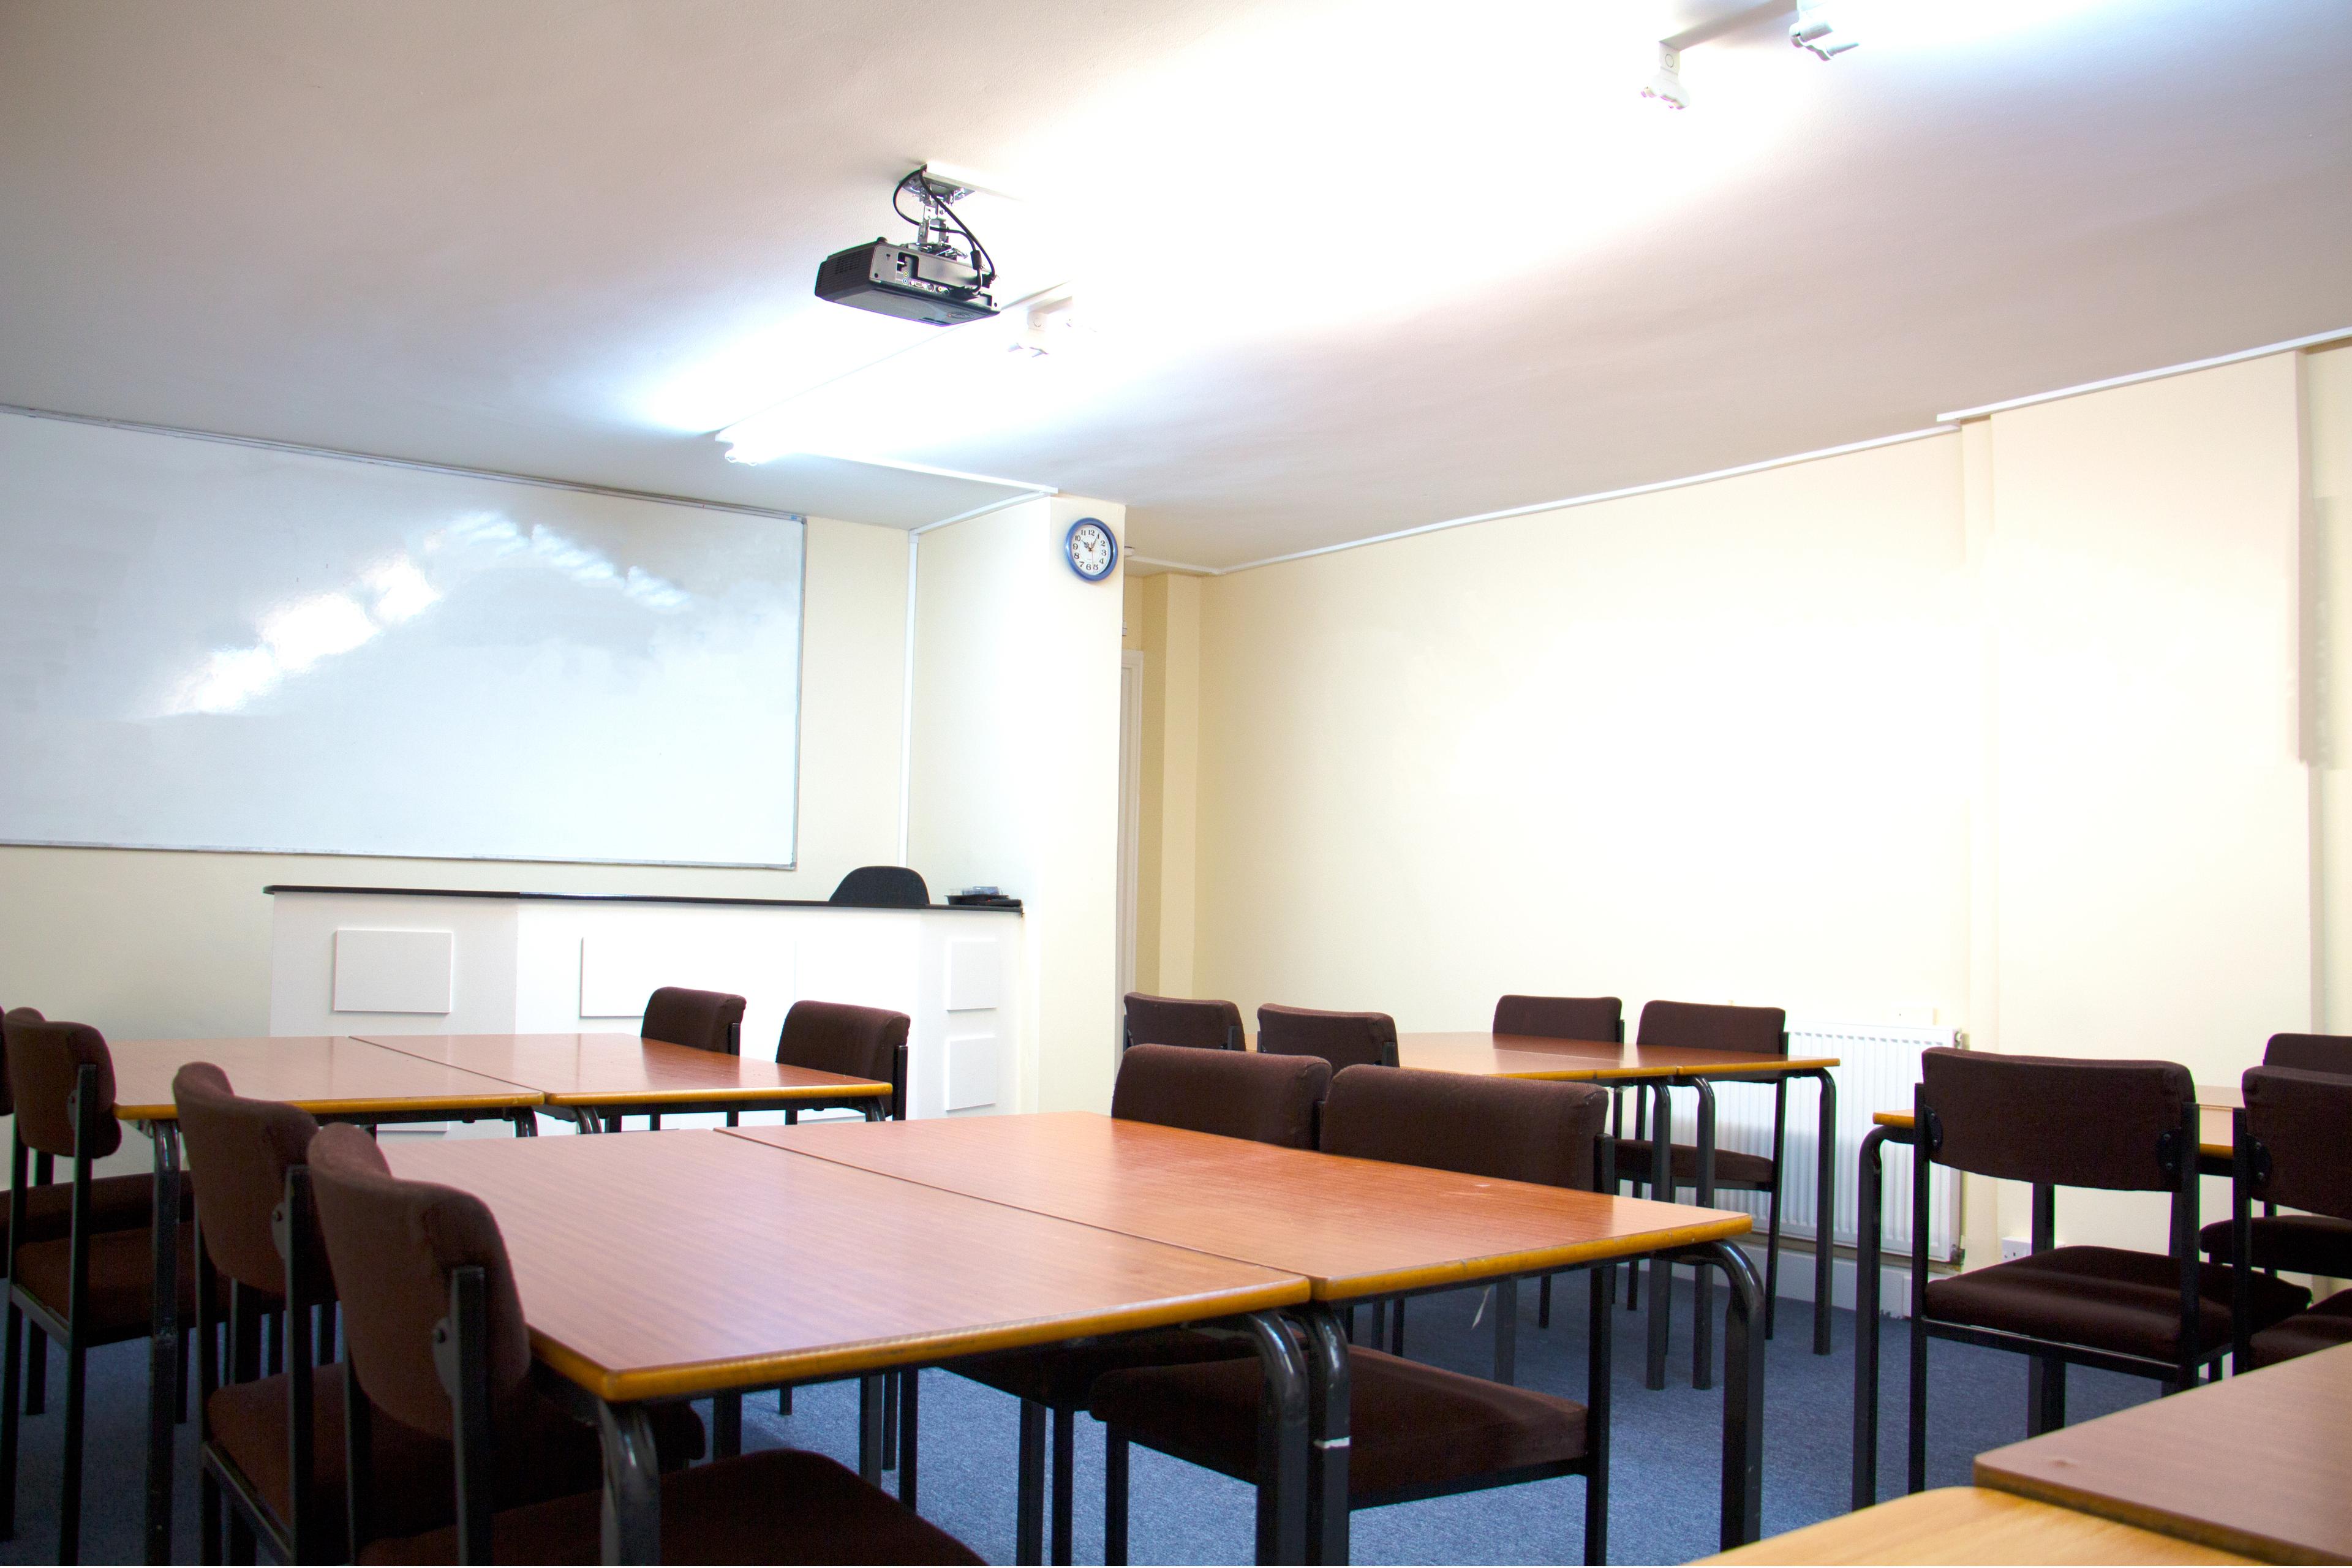 My Meeting Space - North London College, Meeting Room / Classroom 106 photo #3